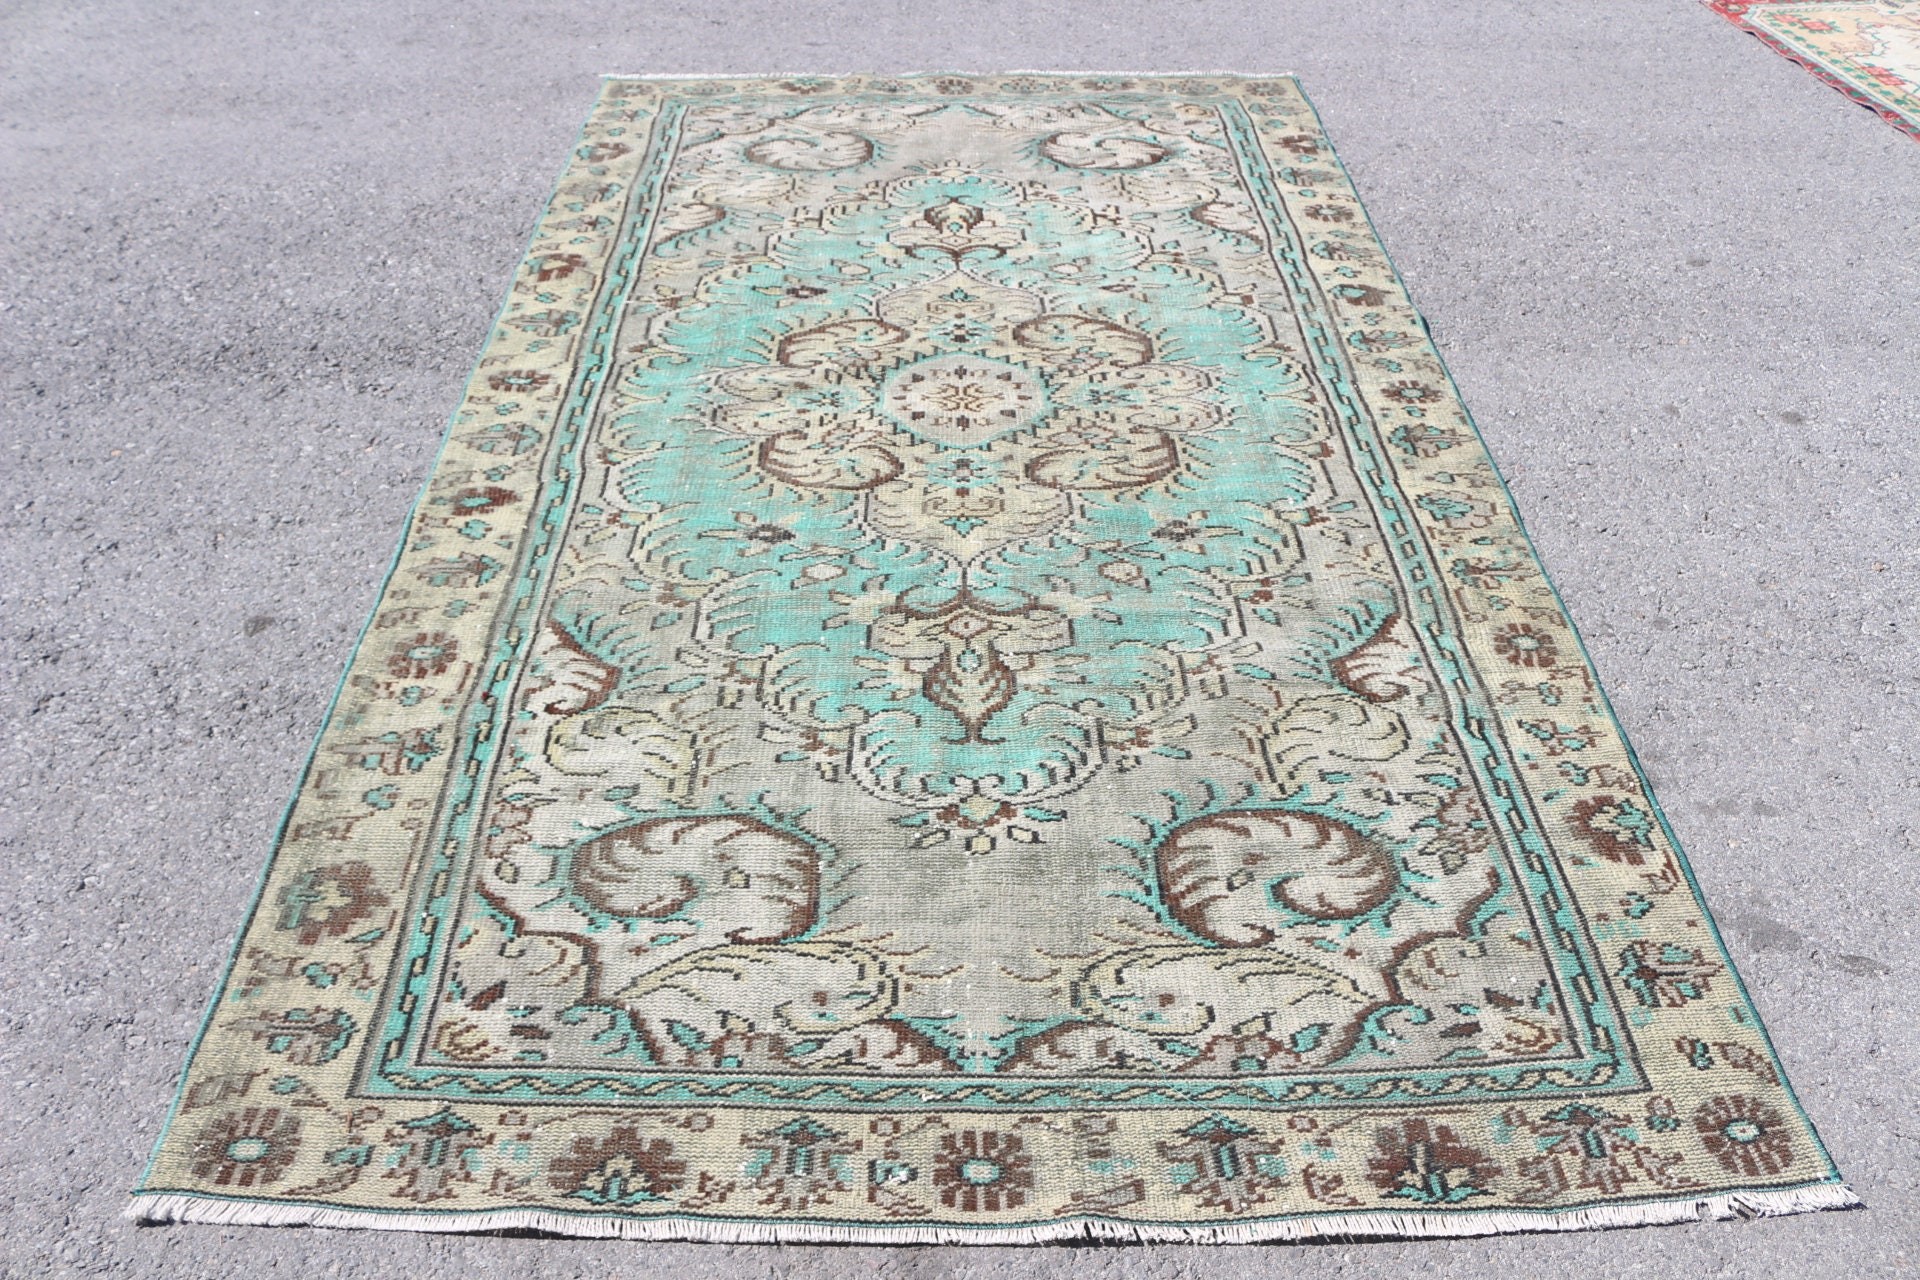 Turkish Rug, Rugs for Dining Room, Cool Rug, Moroccan Rugs, 5.3x9.5 ft Large Rugs, Vintage Rug, Green Cool Rug, Salon Rug, Dining Room Rug